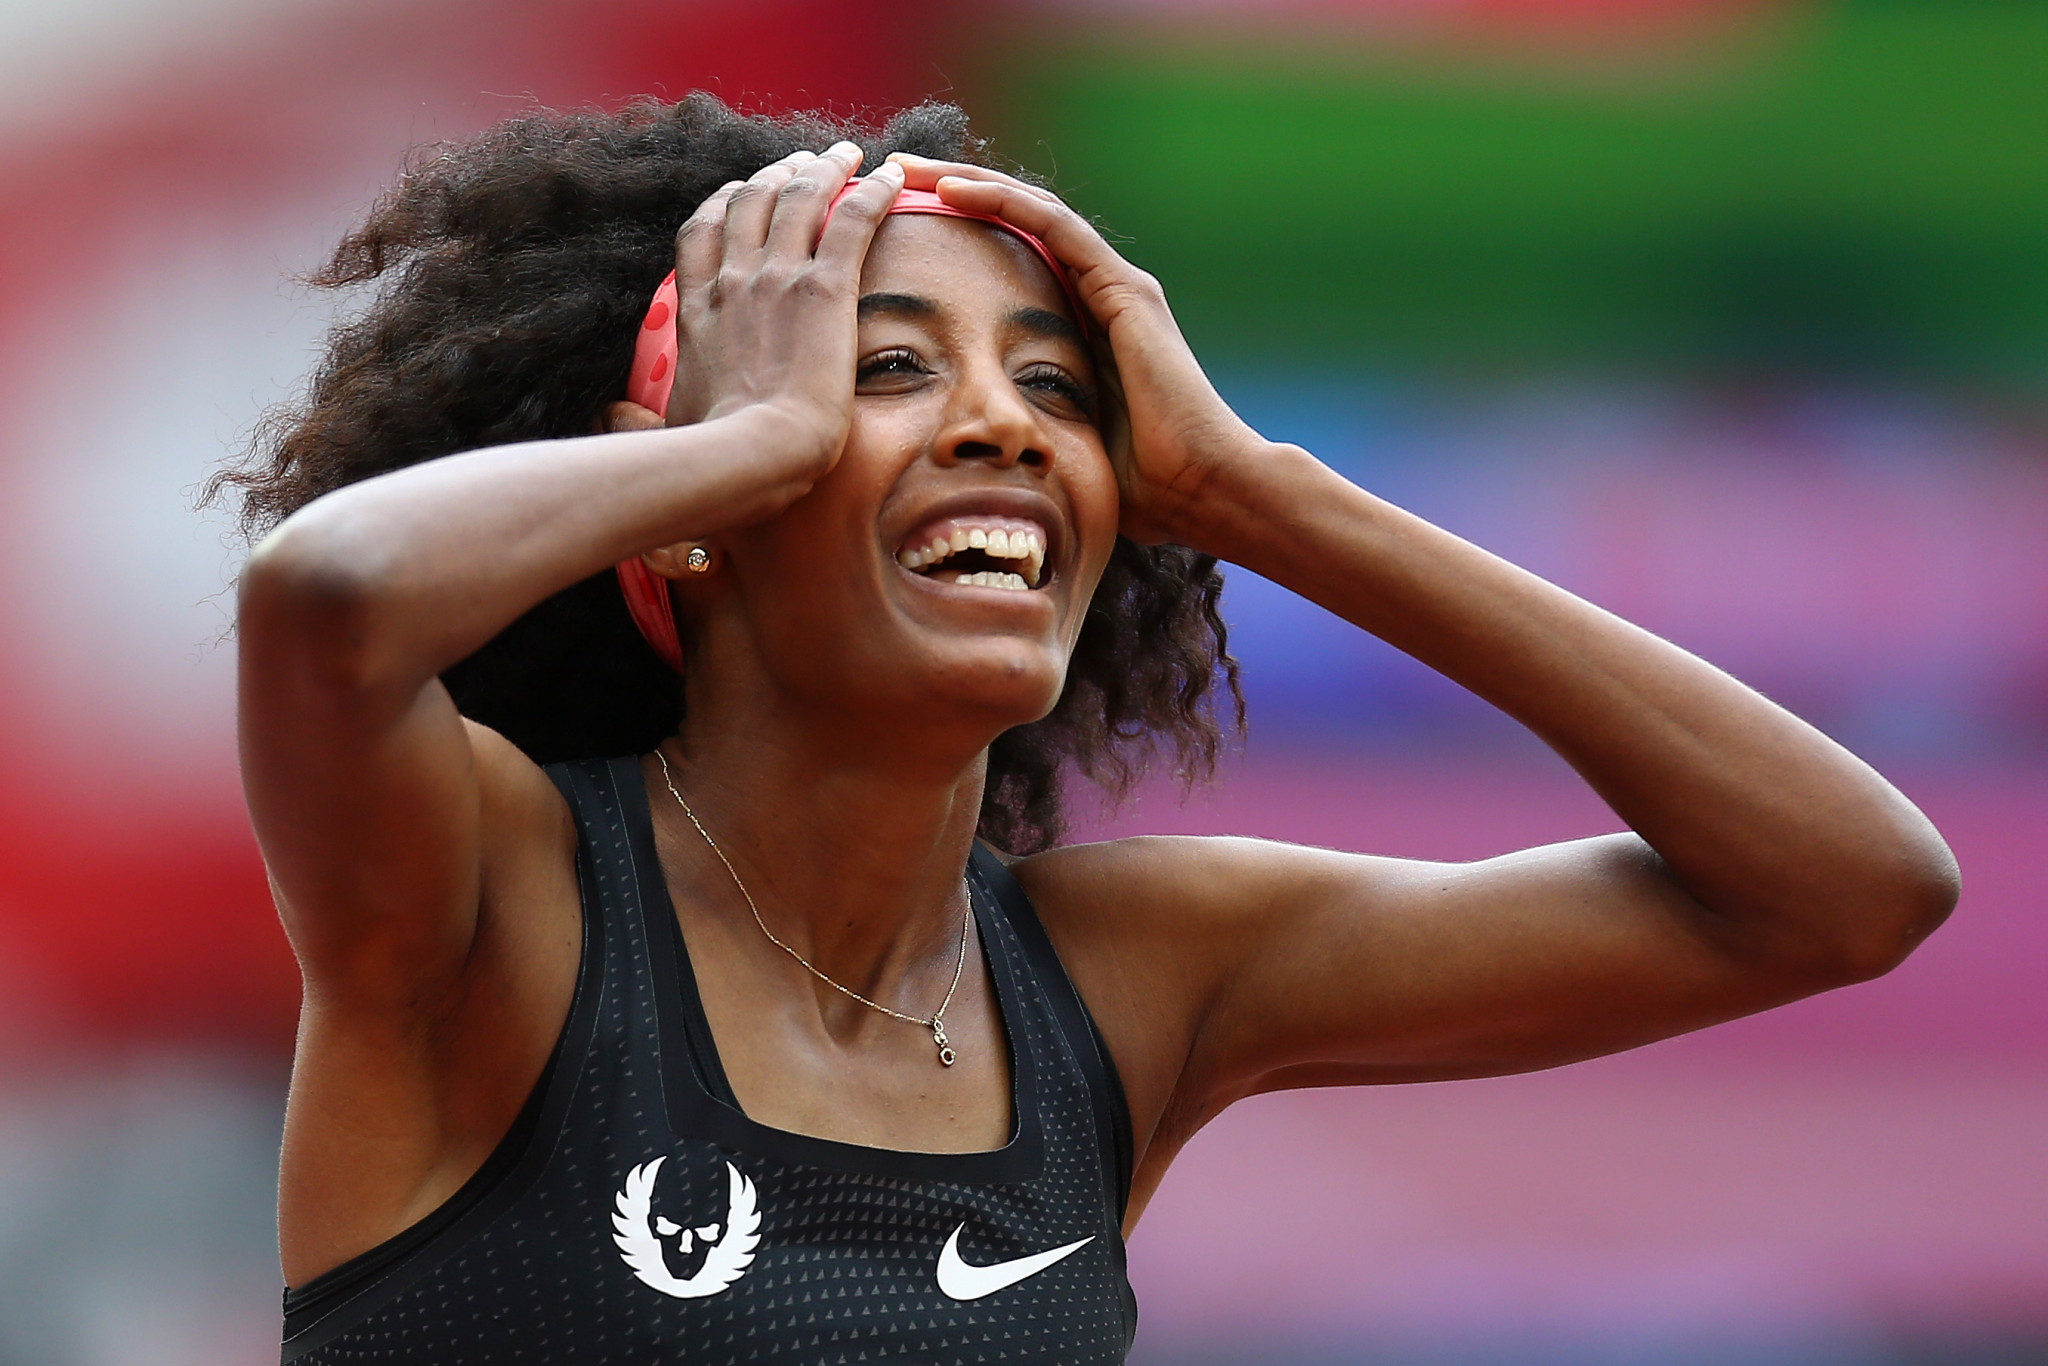 Hassan stars in women’s mile as Korir leads 800m charge at IAAF Diamond League in London 